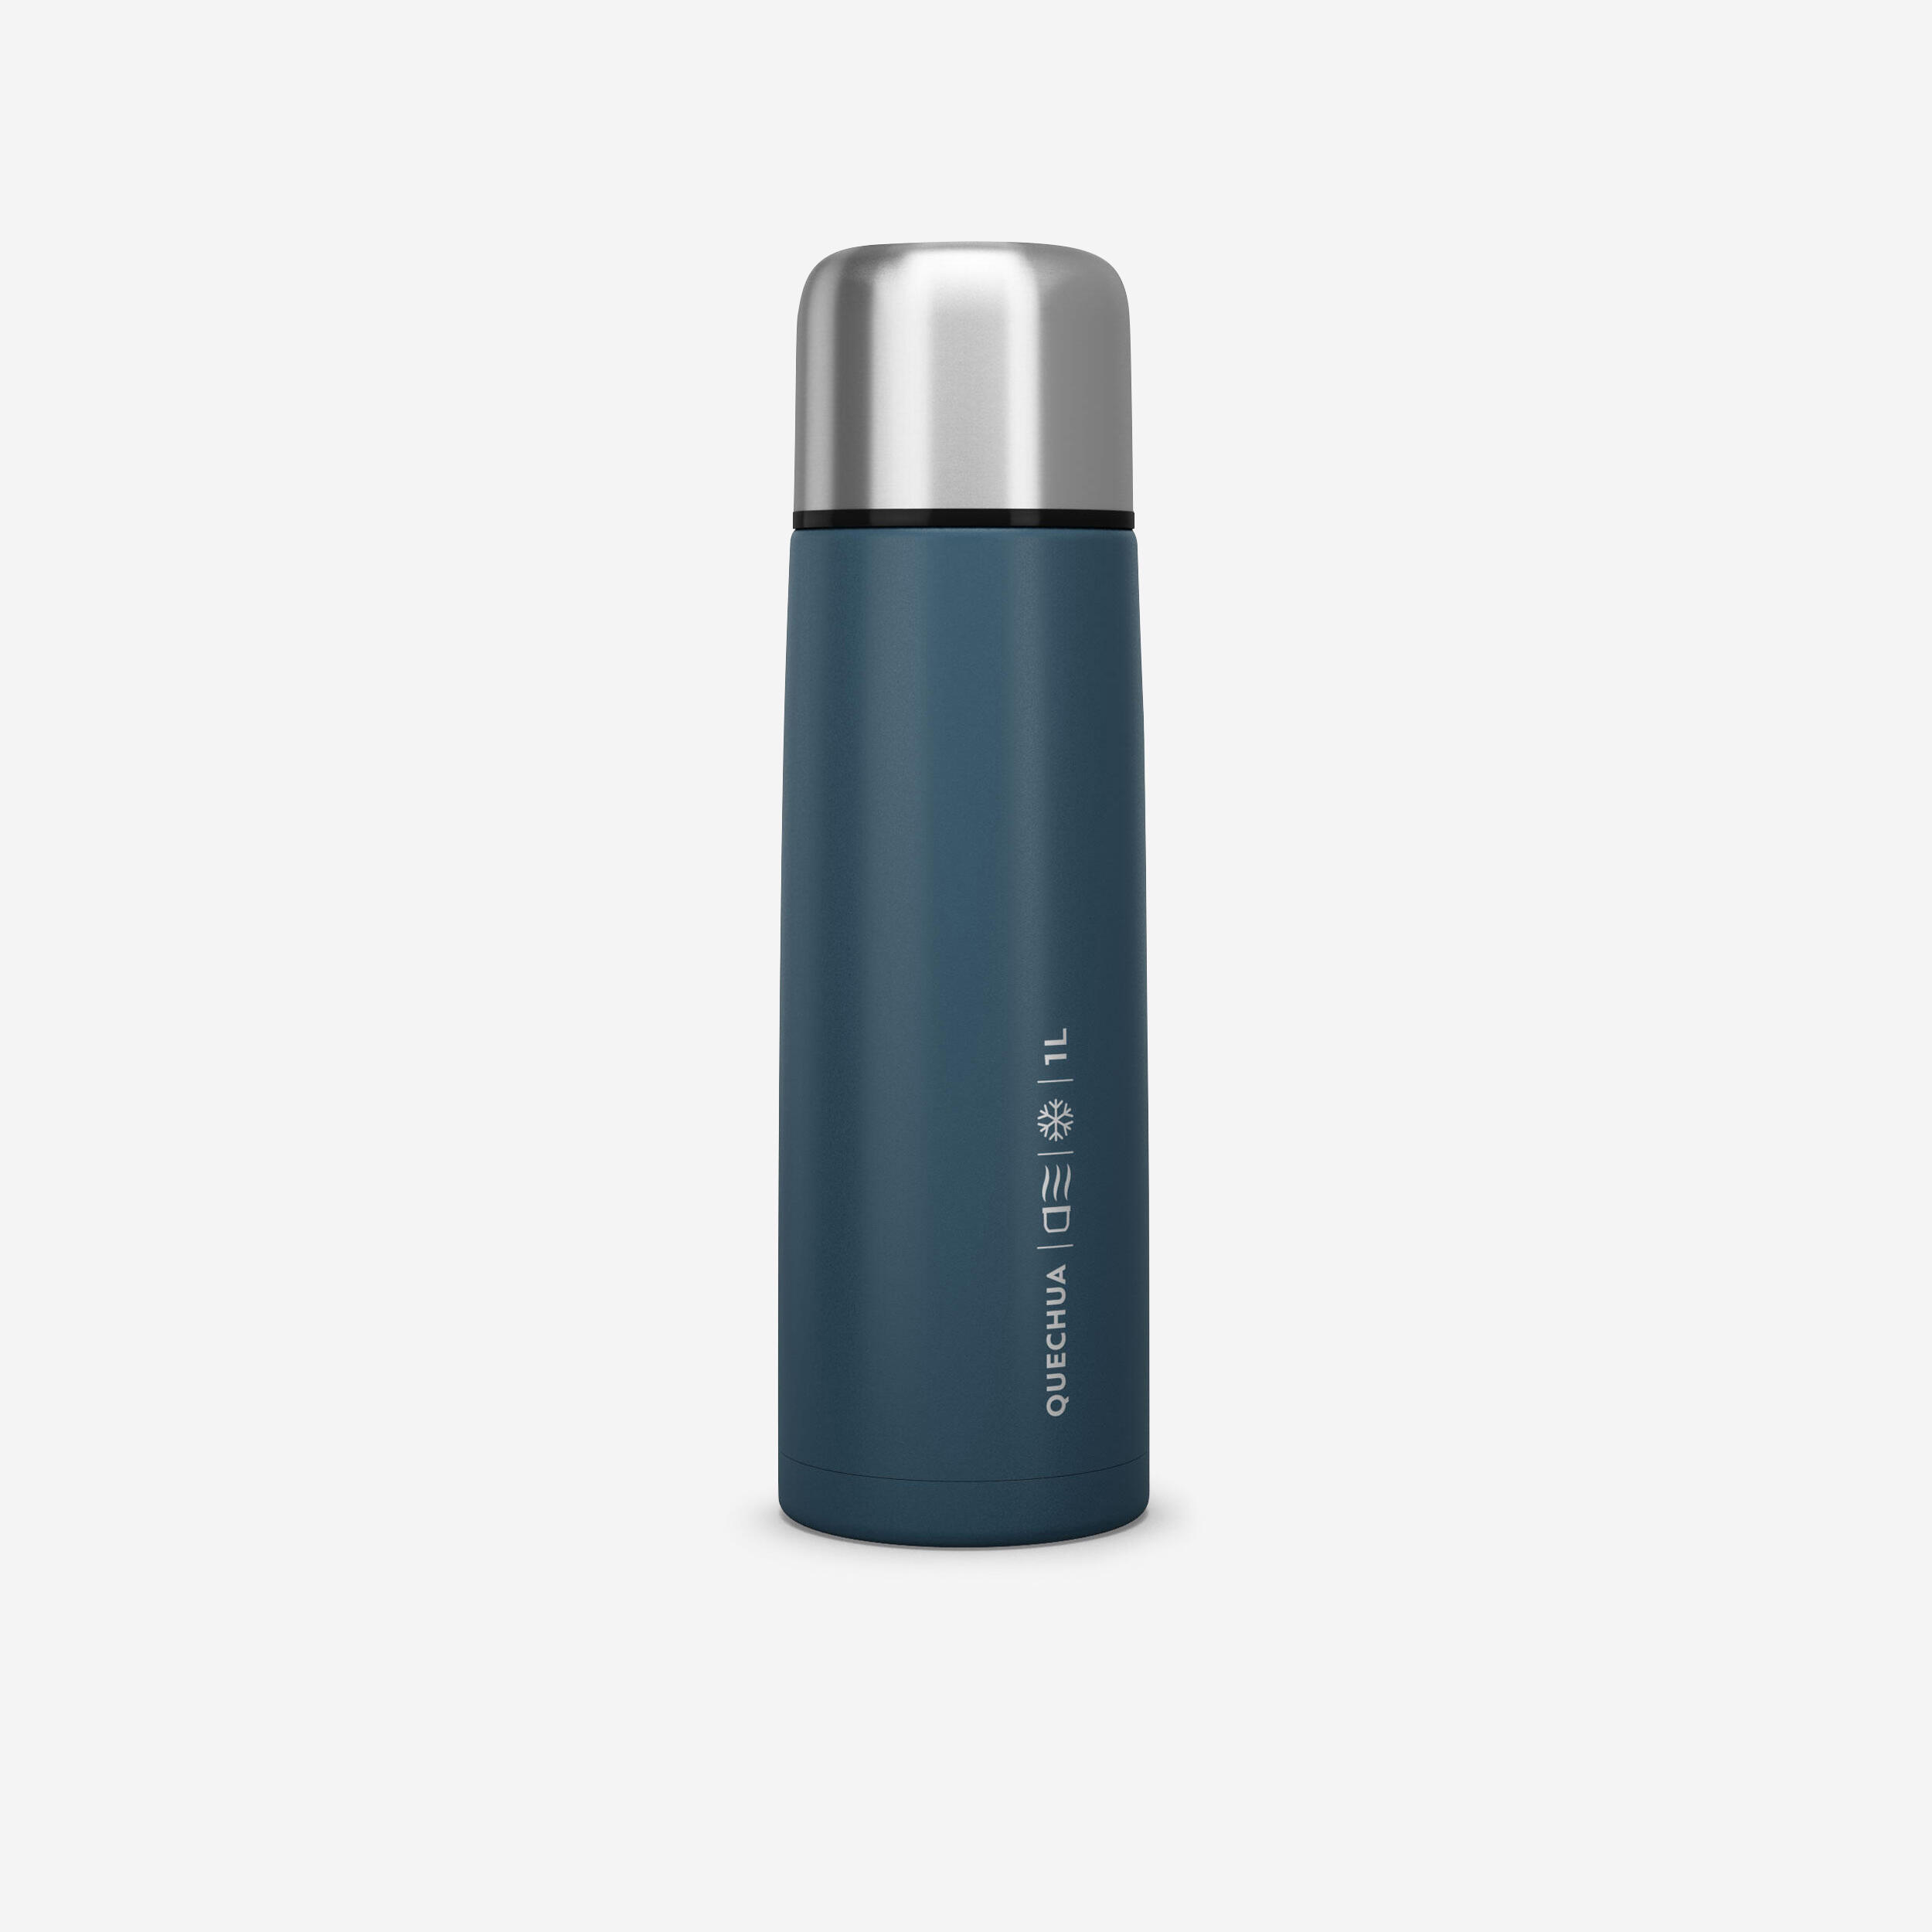 1 L stainless steel isothermal water bottle with cup for hiking - Blue 1/9